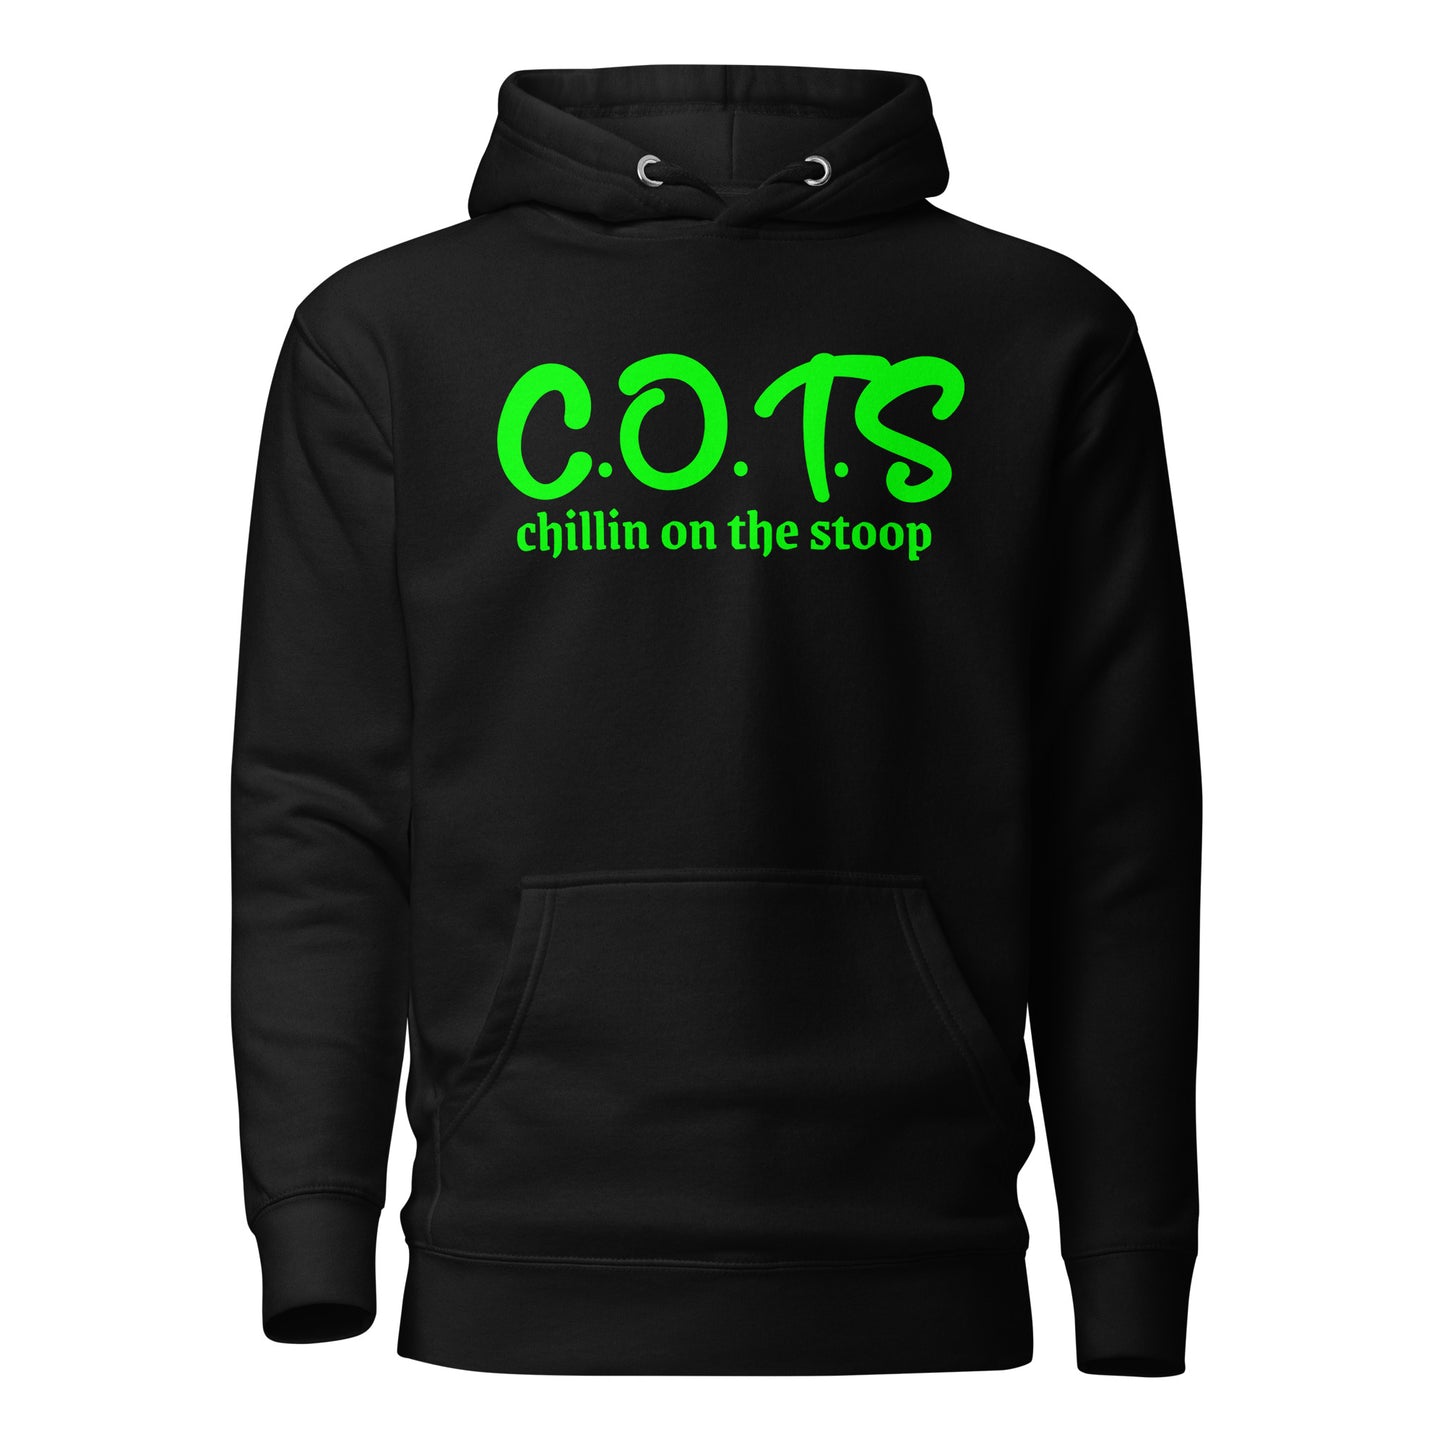 C.O.TS CHILLIN ON THE STOOP Unisex Hoodie